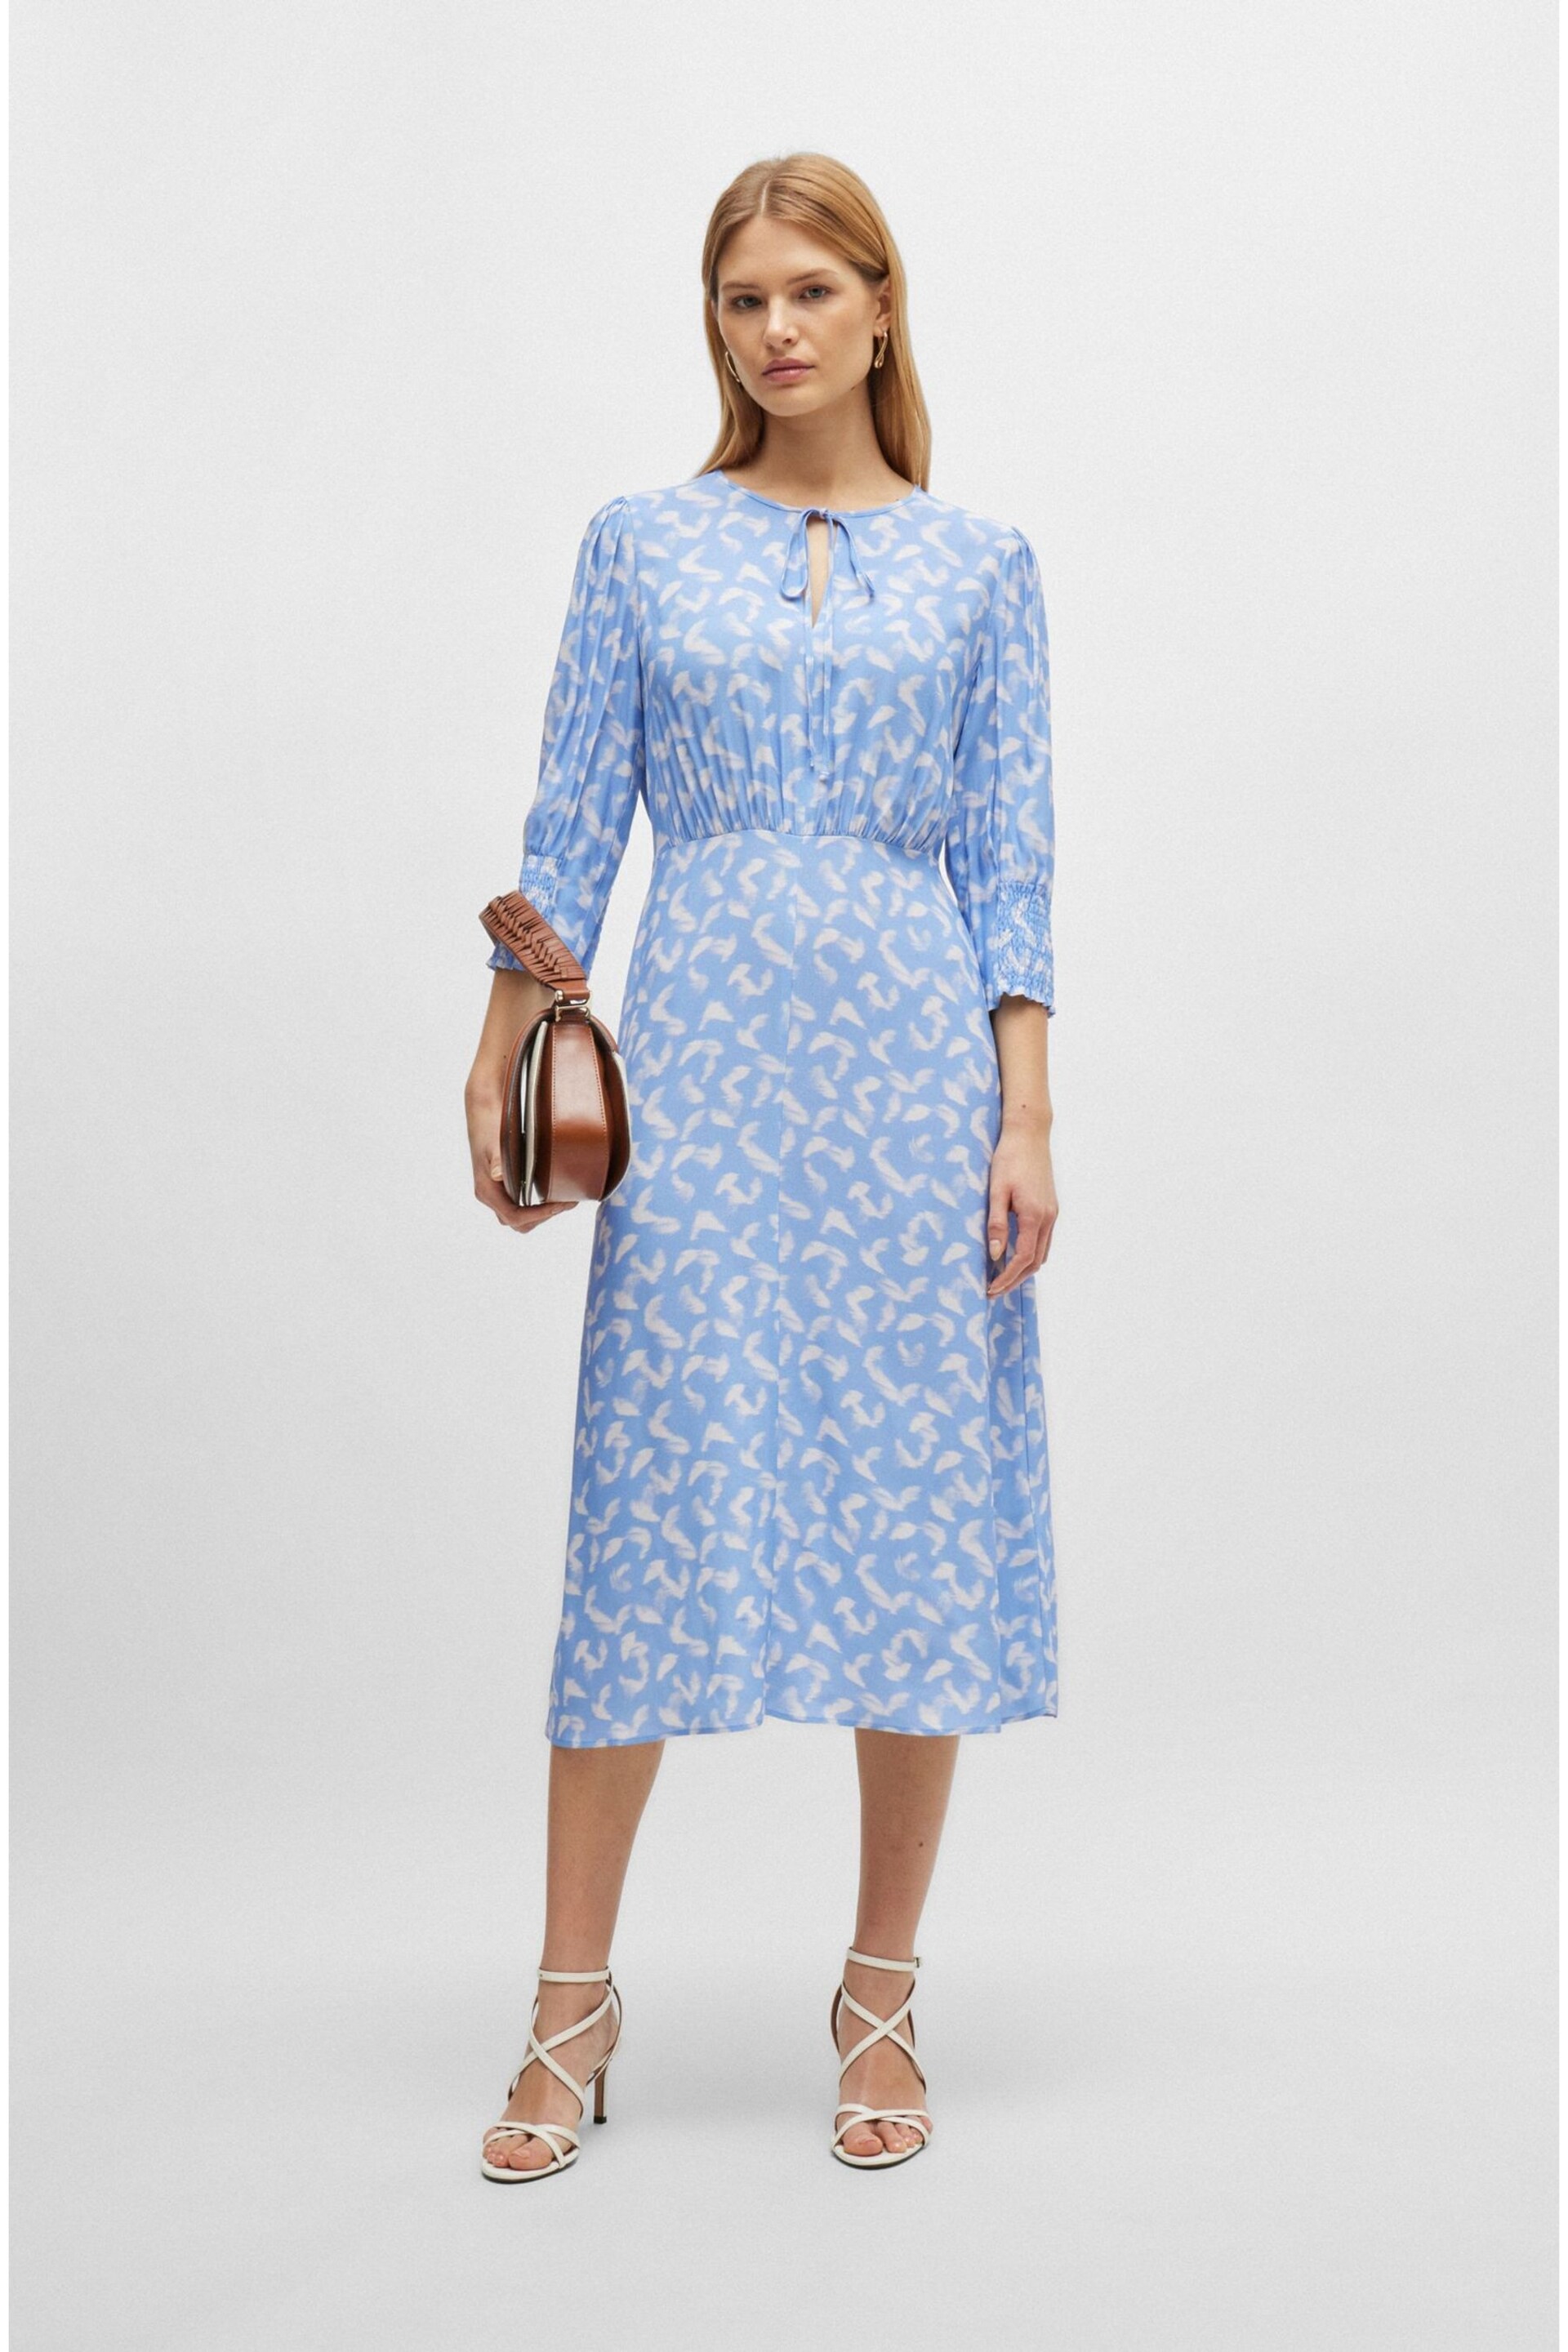 BOSS Blue Tie-Neck Dress With Cropped Sleeves - Image 2 of 5